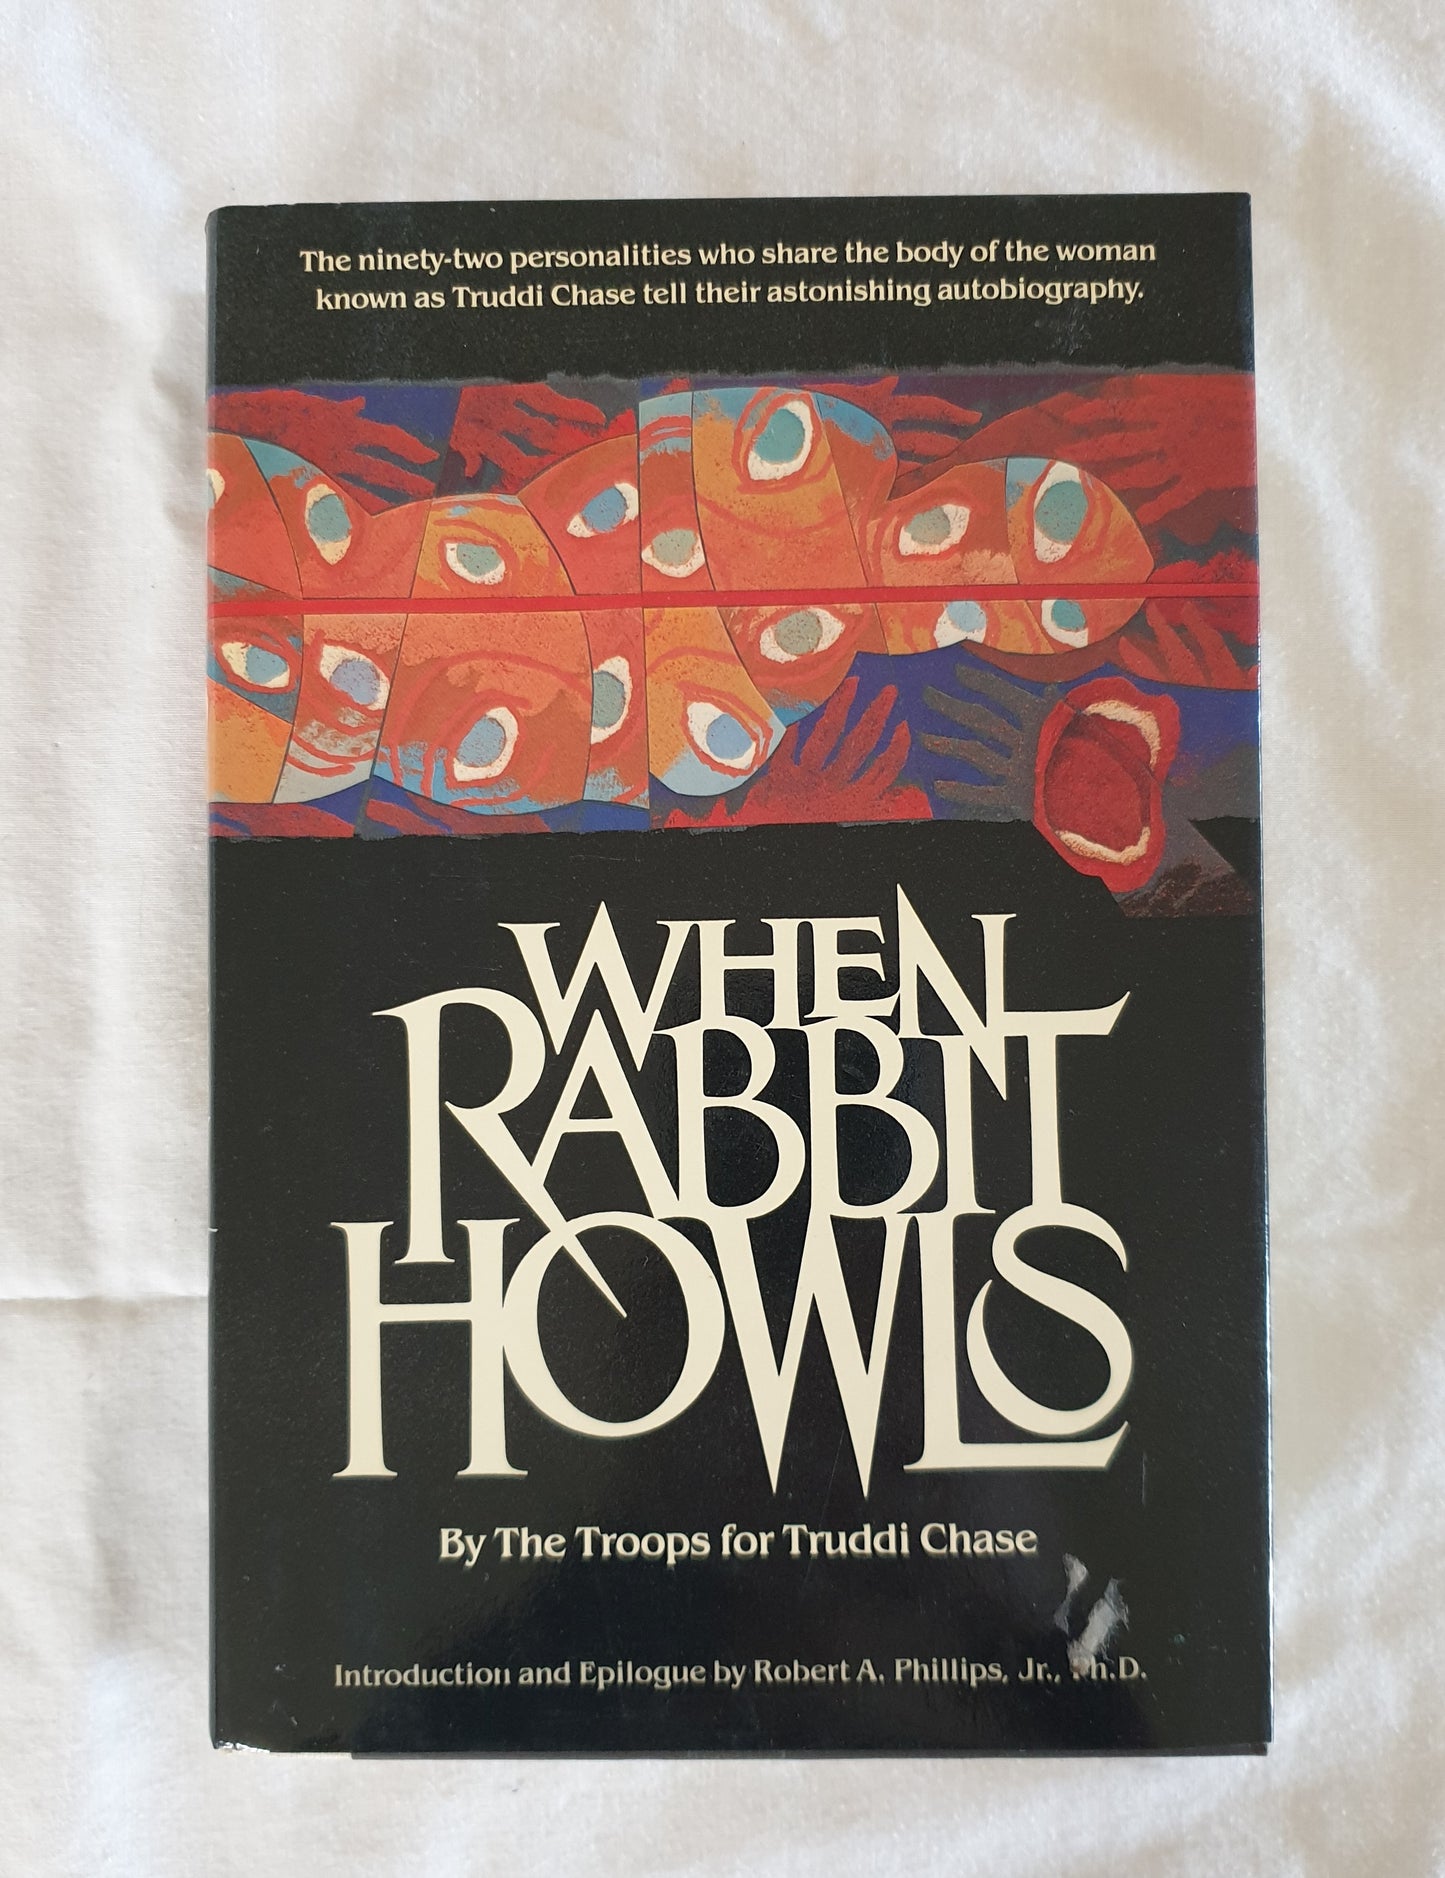 When Rabbit Howls by The Troops for Truddi Chase